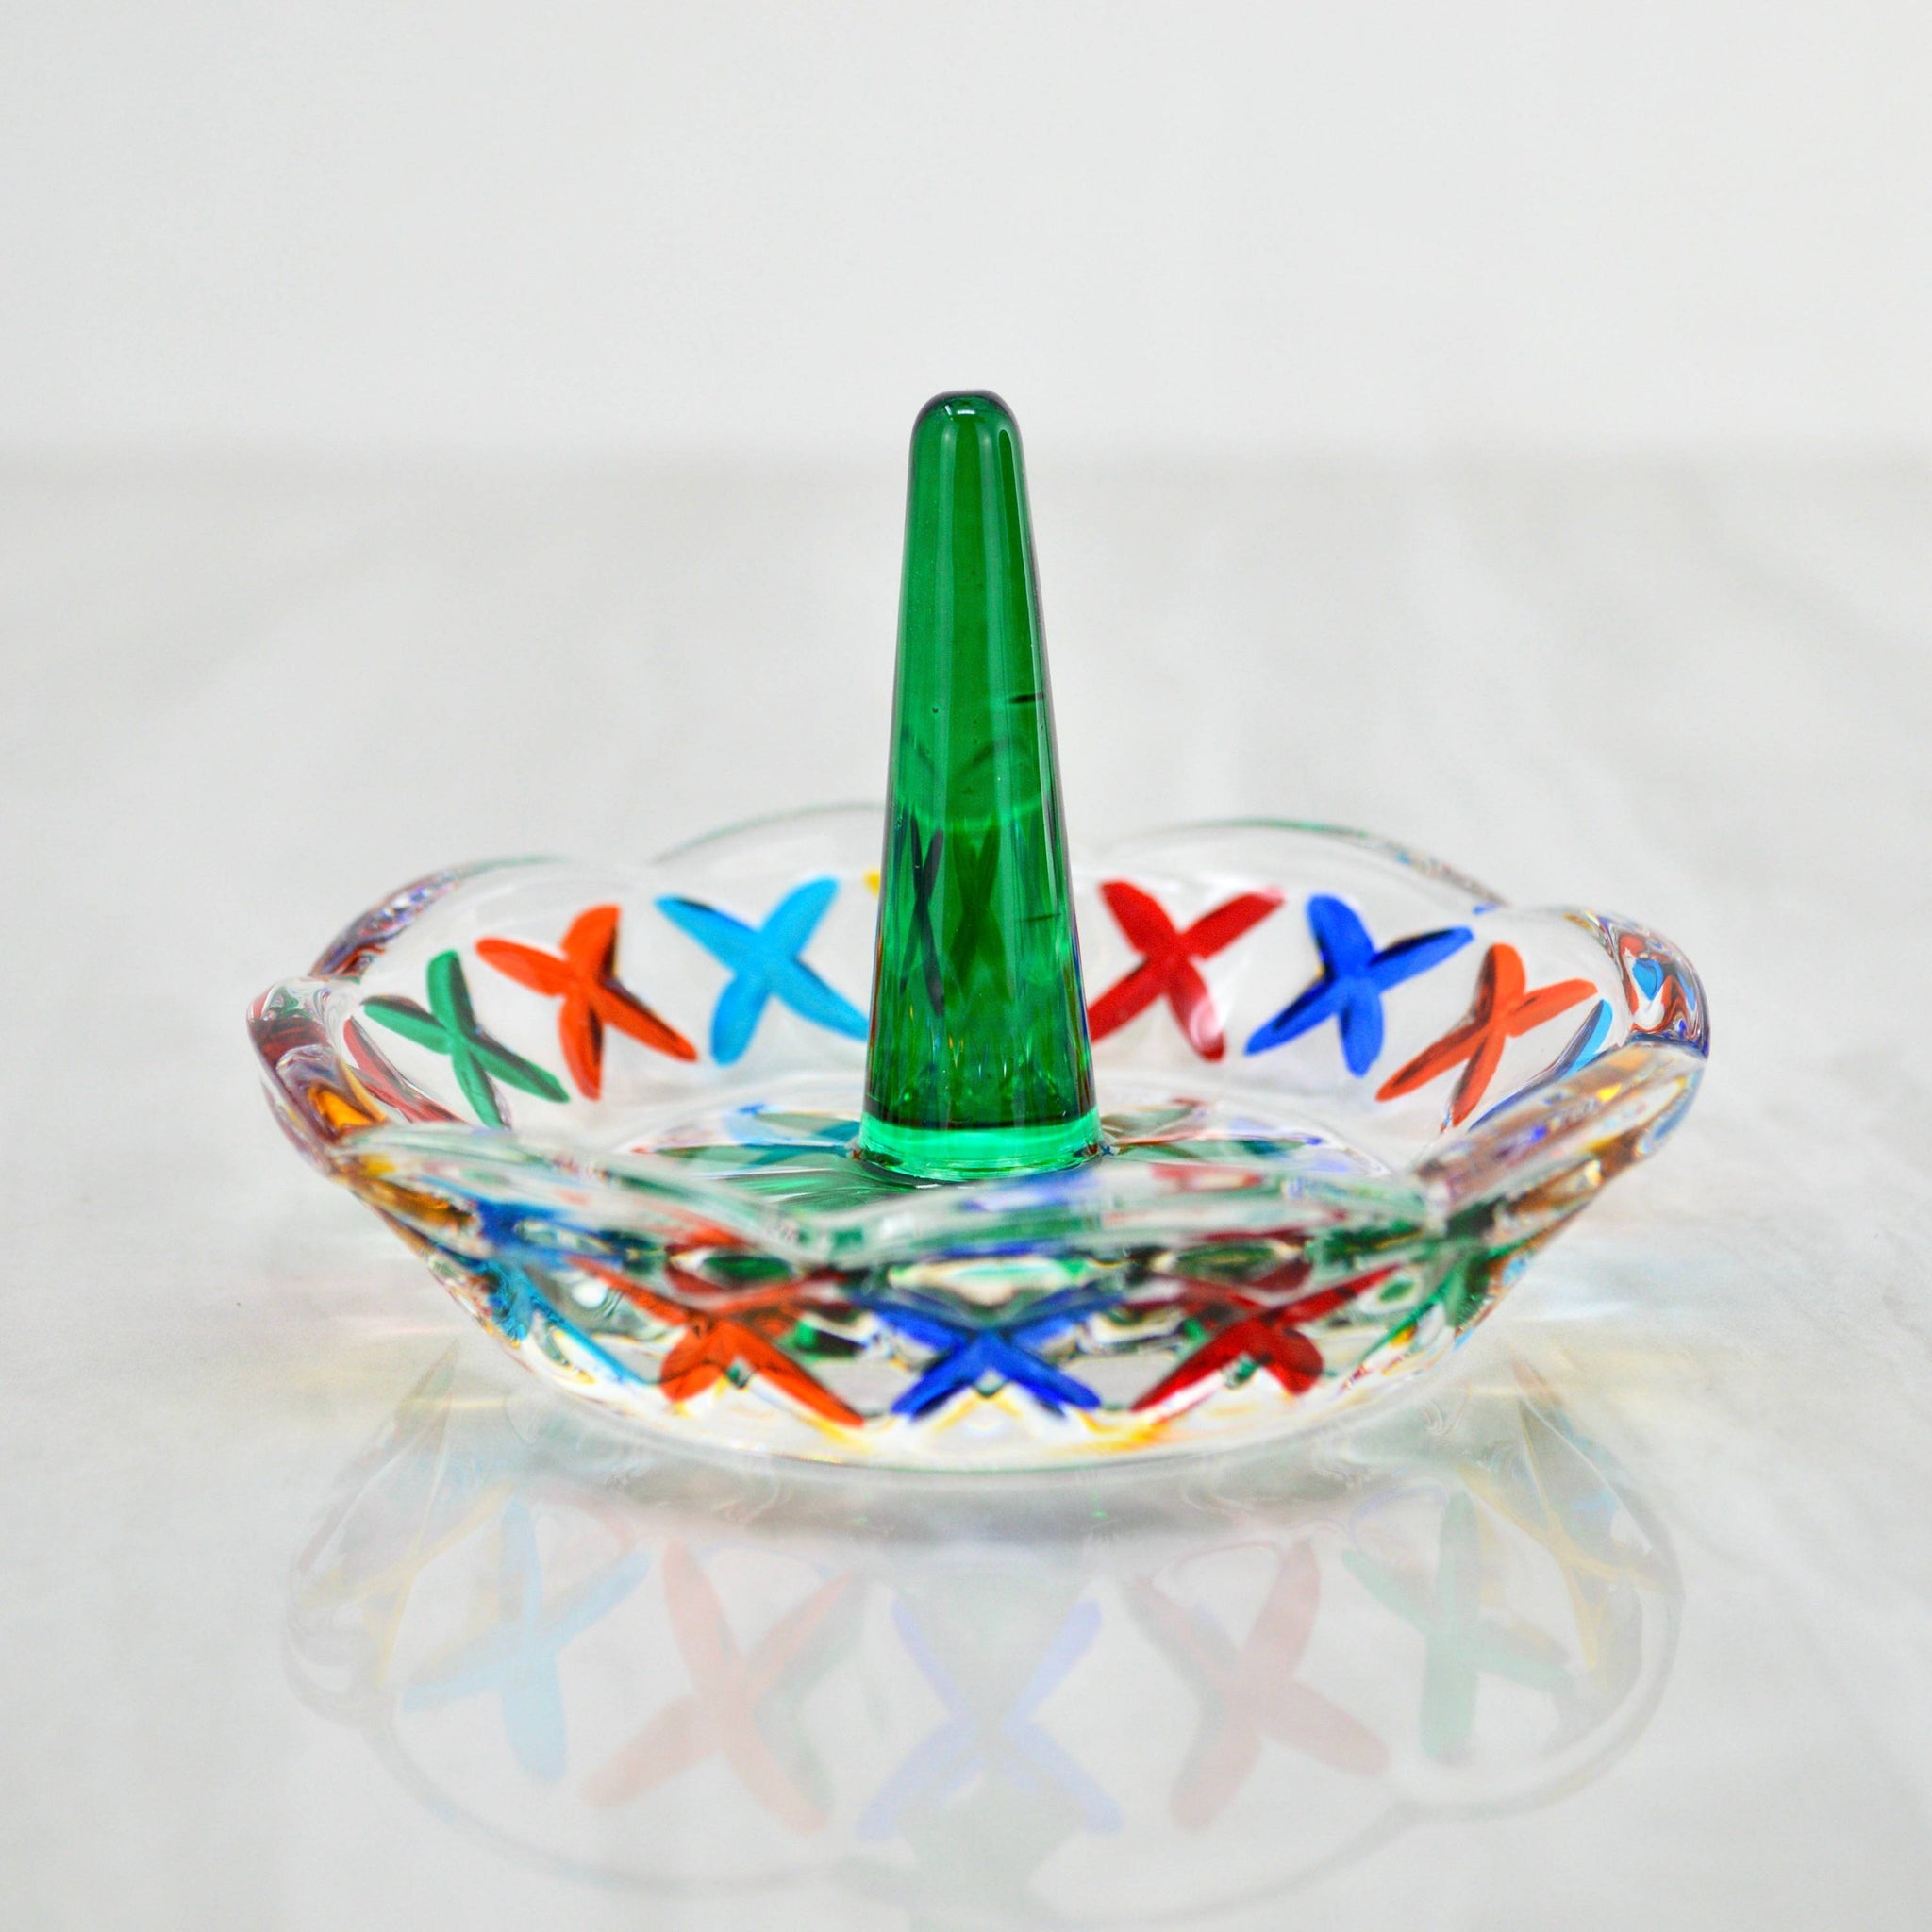 Ring Dish, Hand Painted Italian Crystal, Made in Italy